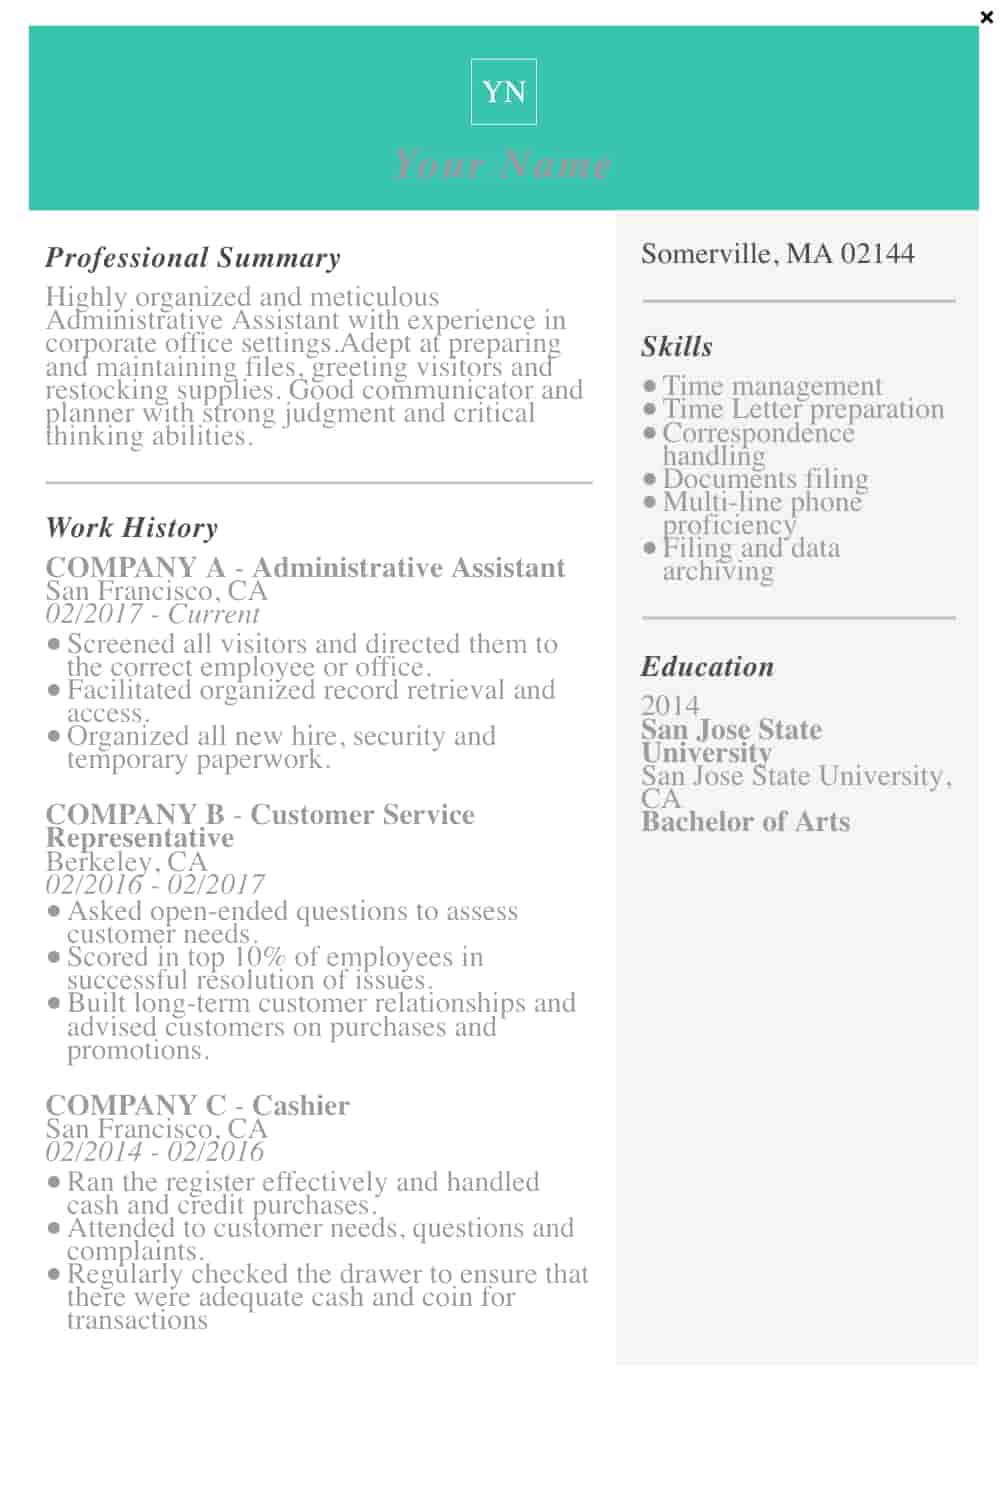 Resume Template For Office from blog.hubspot.com